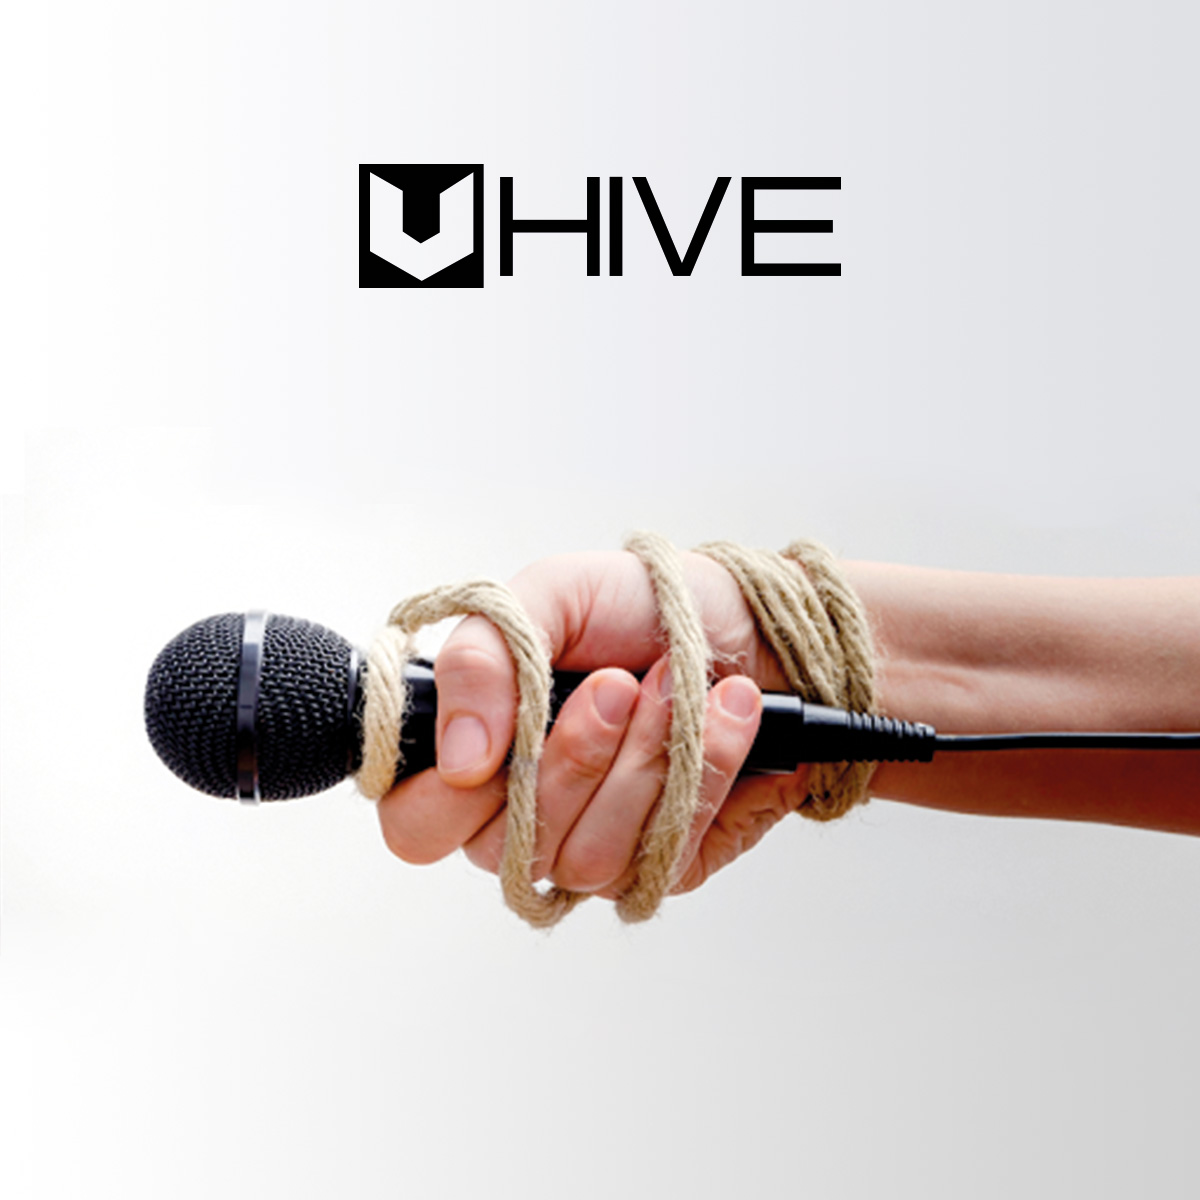 🗨️ Unleash Your Thoughts with Uhive! 

🚀 Let Your Voice Echo. 

#Uhive #SpeakYourMind #freedomofexpression  #UhiveVibes